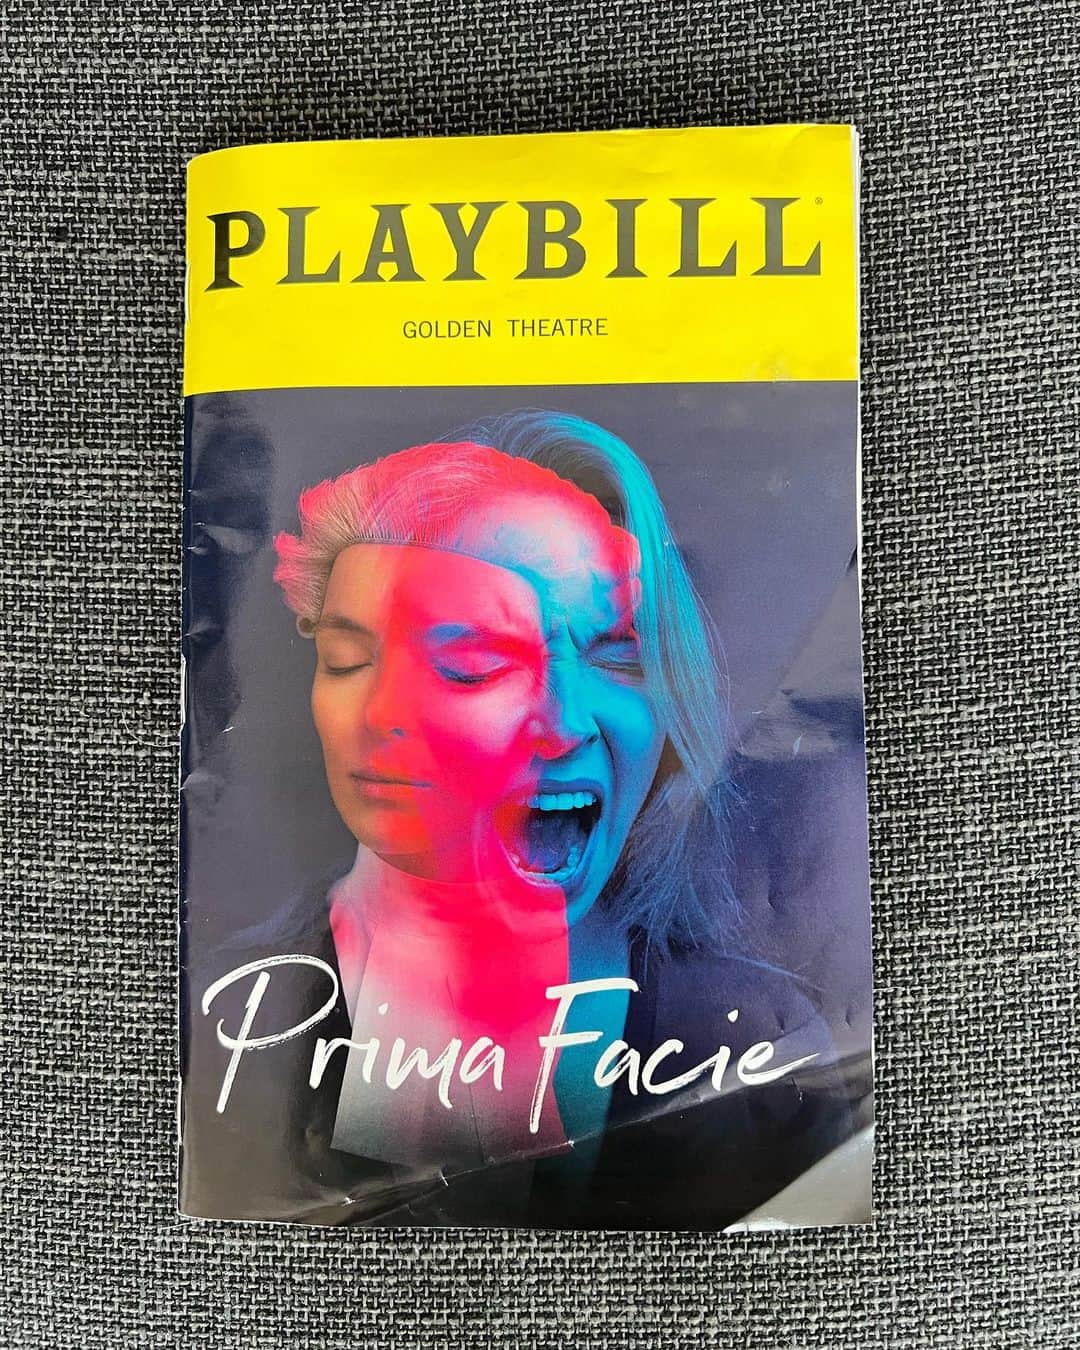 ベラミー・ヤングさんのインスタグラム写真 - (ベラミー・ヤングInstagram)「It's taken me a minute to begin to digest the ENORMOUS IMPACT of getting to see @primafaciebroadwayplay  @jodiemcomer 's performance alone is a masterclass & an absolutely gutting revelation. It's an honor to have gotten to witness the work she is sharing 8 shows a week. 🤯🔥👑  Even beyond that, @suziemillerwriter has given us a gift & a challenge: as the program says best, "On the face of it, SOMETHING HAS TO CHANGE." I wanted to include the information below from the #playbill. Some of it may surprise you- or not, but there are actionable parts that I wanted to amplify so everyone, regardless of whether they get to see the show, has access.  Please consider supporting @scpconsent #SchoolsConsentProject & consider sharing your own story.  I'm sending everyone so very much love. Today & always. #PrimaFacie #Broadway ❤️  Every 98 seconds someone in the US is sexually assaulted. An estimated 735,000 rapes were reported in the US last year. It is estimated only 19% of all rapes are reported. That means that probably well over 3.8 million women were raped in the US last year. Nearly 1 in 2 women have experienced rape, sexual violence, or stalking by an intimate partner in their lifetime. In the age range 14-25 this rises to 97% of women reporting having been sexually assaulted. In 8 out of 10 rape cases, the victim knew the perpetrator. Trans women, disabled women and BIPOC women are twice as likely to be assaulted. Only about 5% of rapes reported to the police lead to an arrest. 97.5% of all sexual assault perpetrators arrested walk free. Approximately 70 women commit suicide every day in the US following an act of sexual violence.  It costs around $10 to educate a young person about consent. The Schools Consent Project is a charity sending lawyers into schools, to teach 11-18 year olds the legal definition of consent and certain sexual offences (sexual assault, rape, 'sexting, etc). We have educated over 35,000 young people about consent. Our goal is to normalise conversations about consent, to empower young people to identify and communicate their own boundaries, and to respect them in others. To book a workshop at your school visit schoolsconsentproject.com」5月6日 7時11分 - bellamyyoung